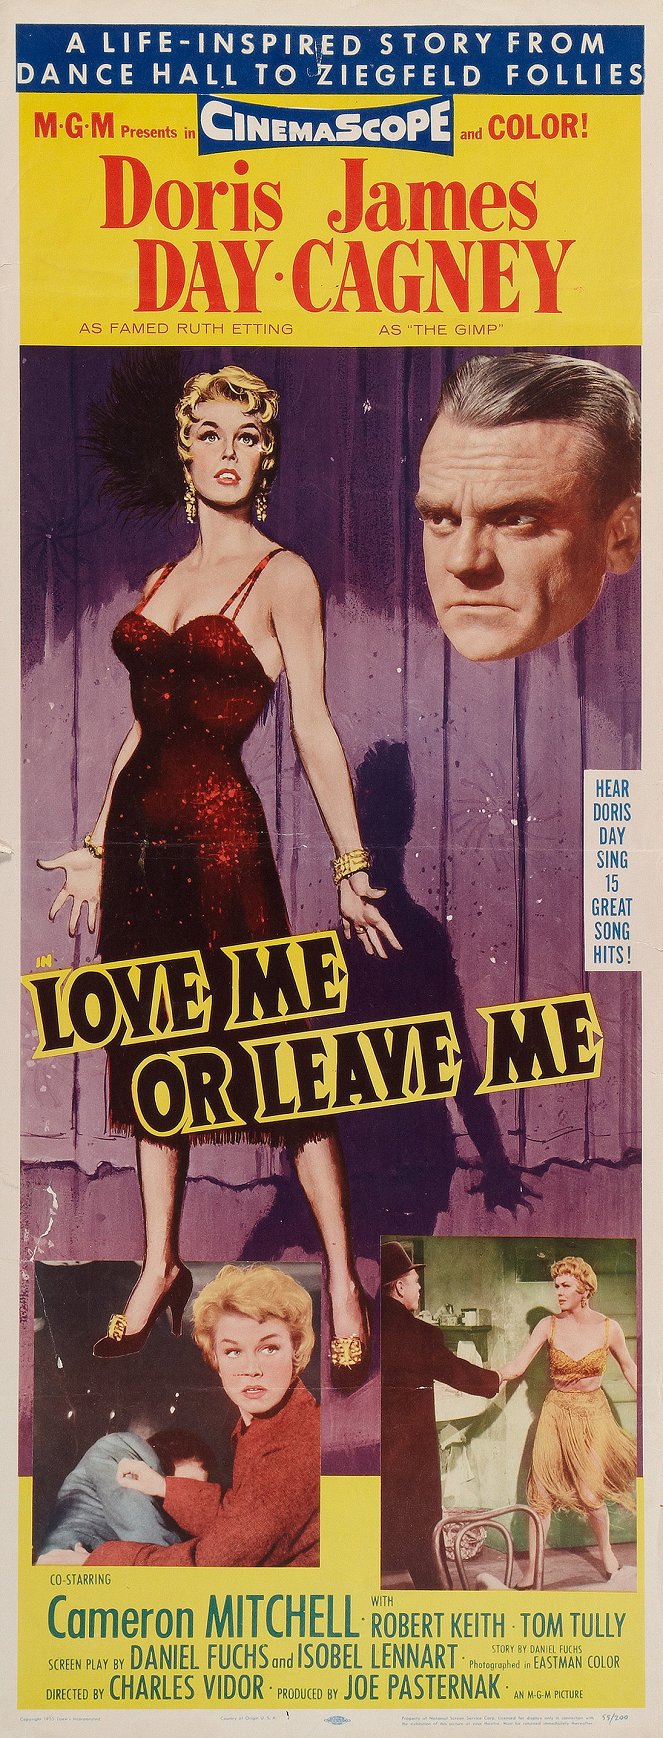 Love Me or Leave Me - Posters